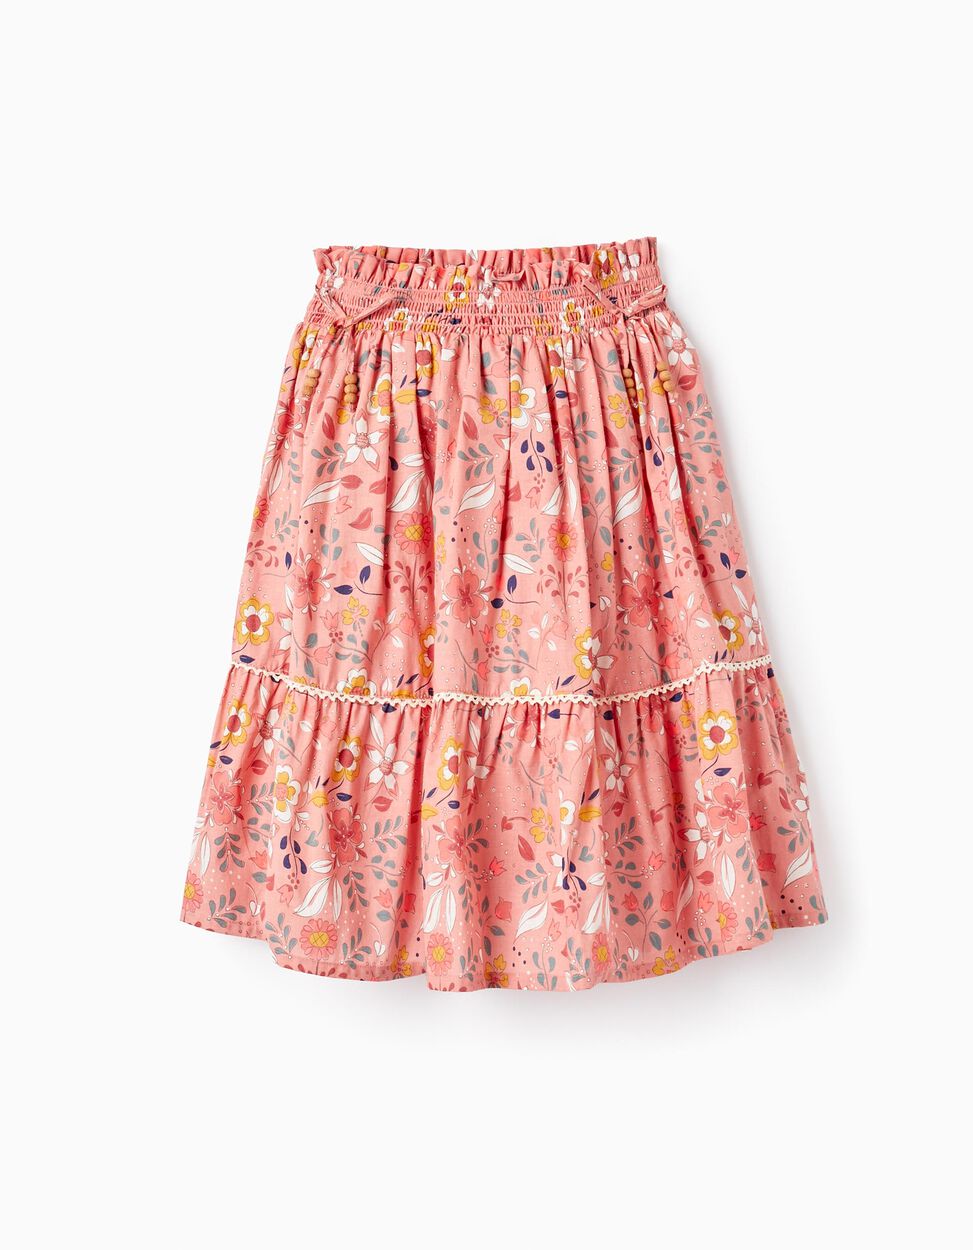 Buy Online Cotton Skirt with Floral Pattern for Girls, Coral